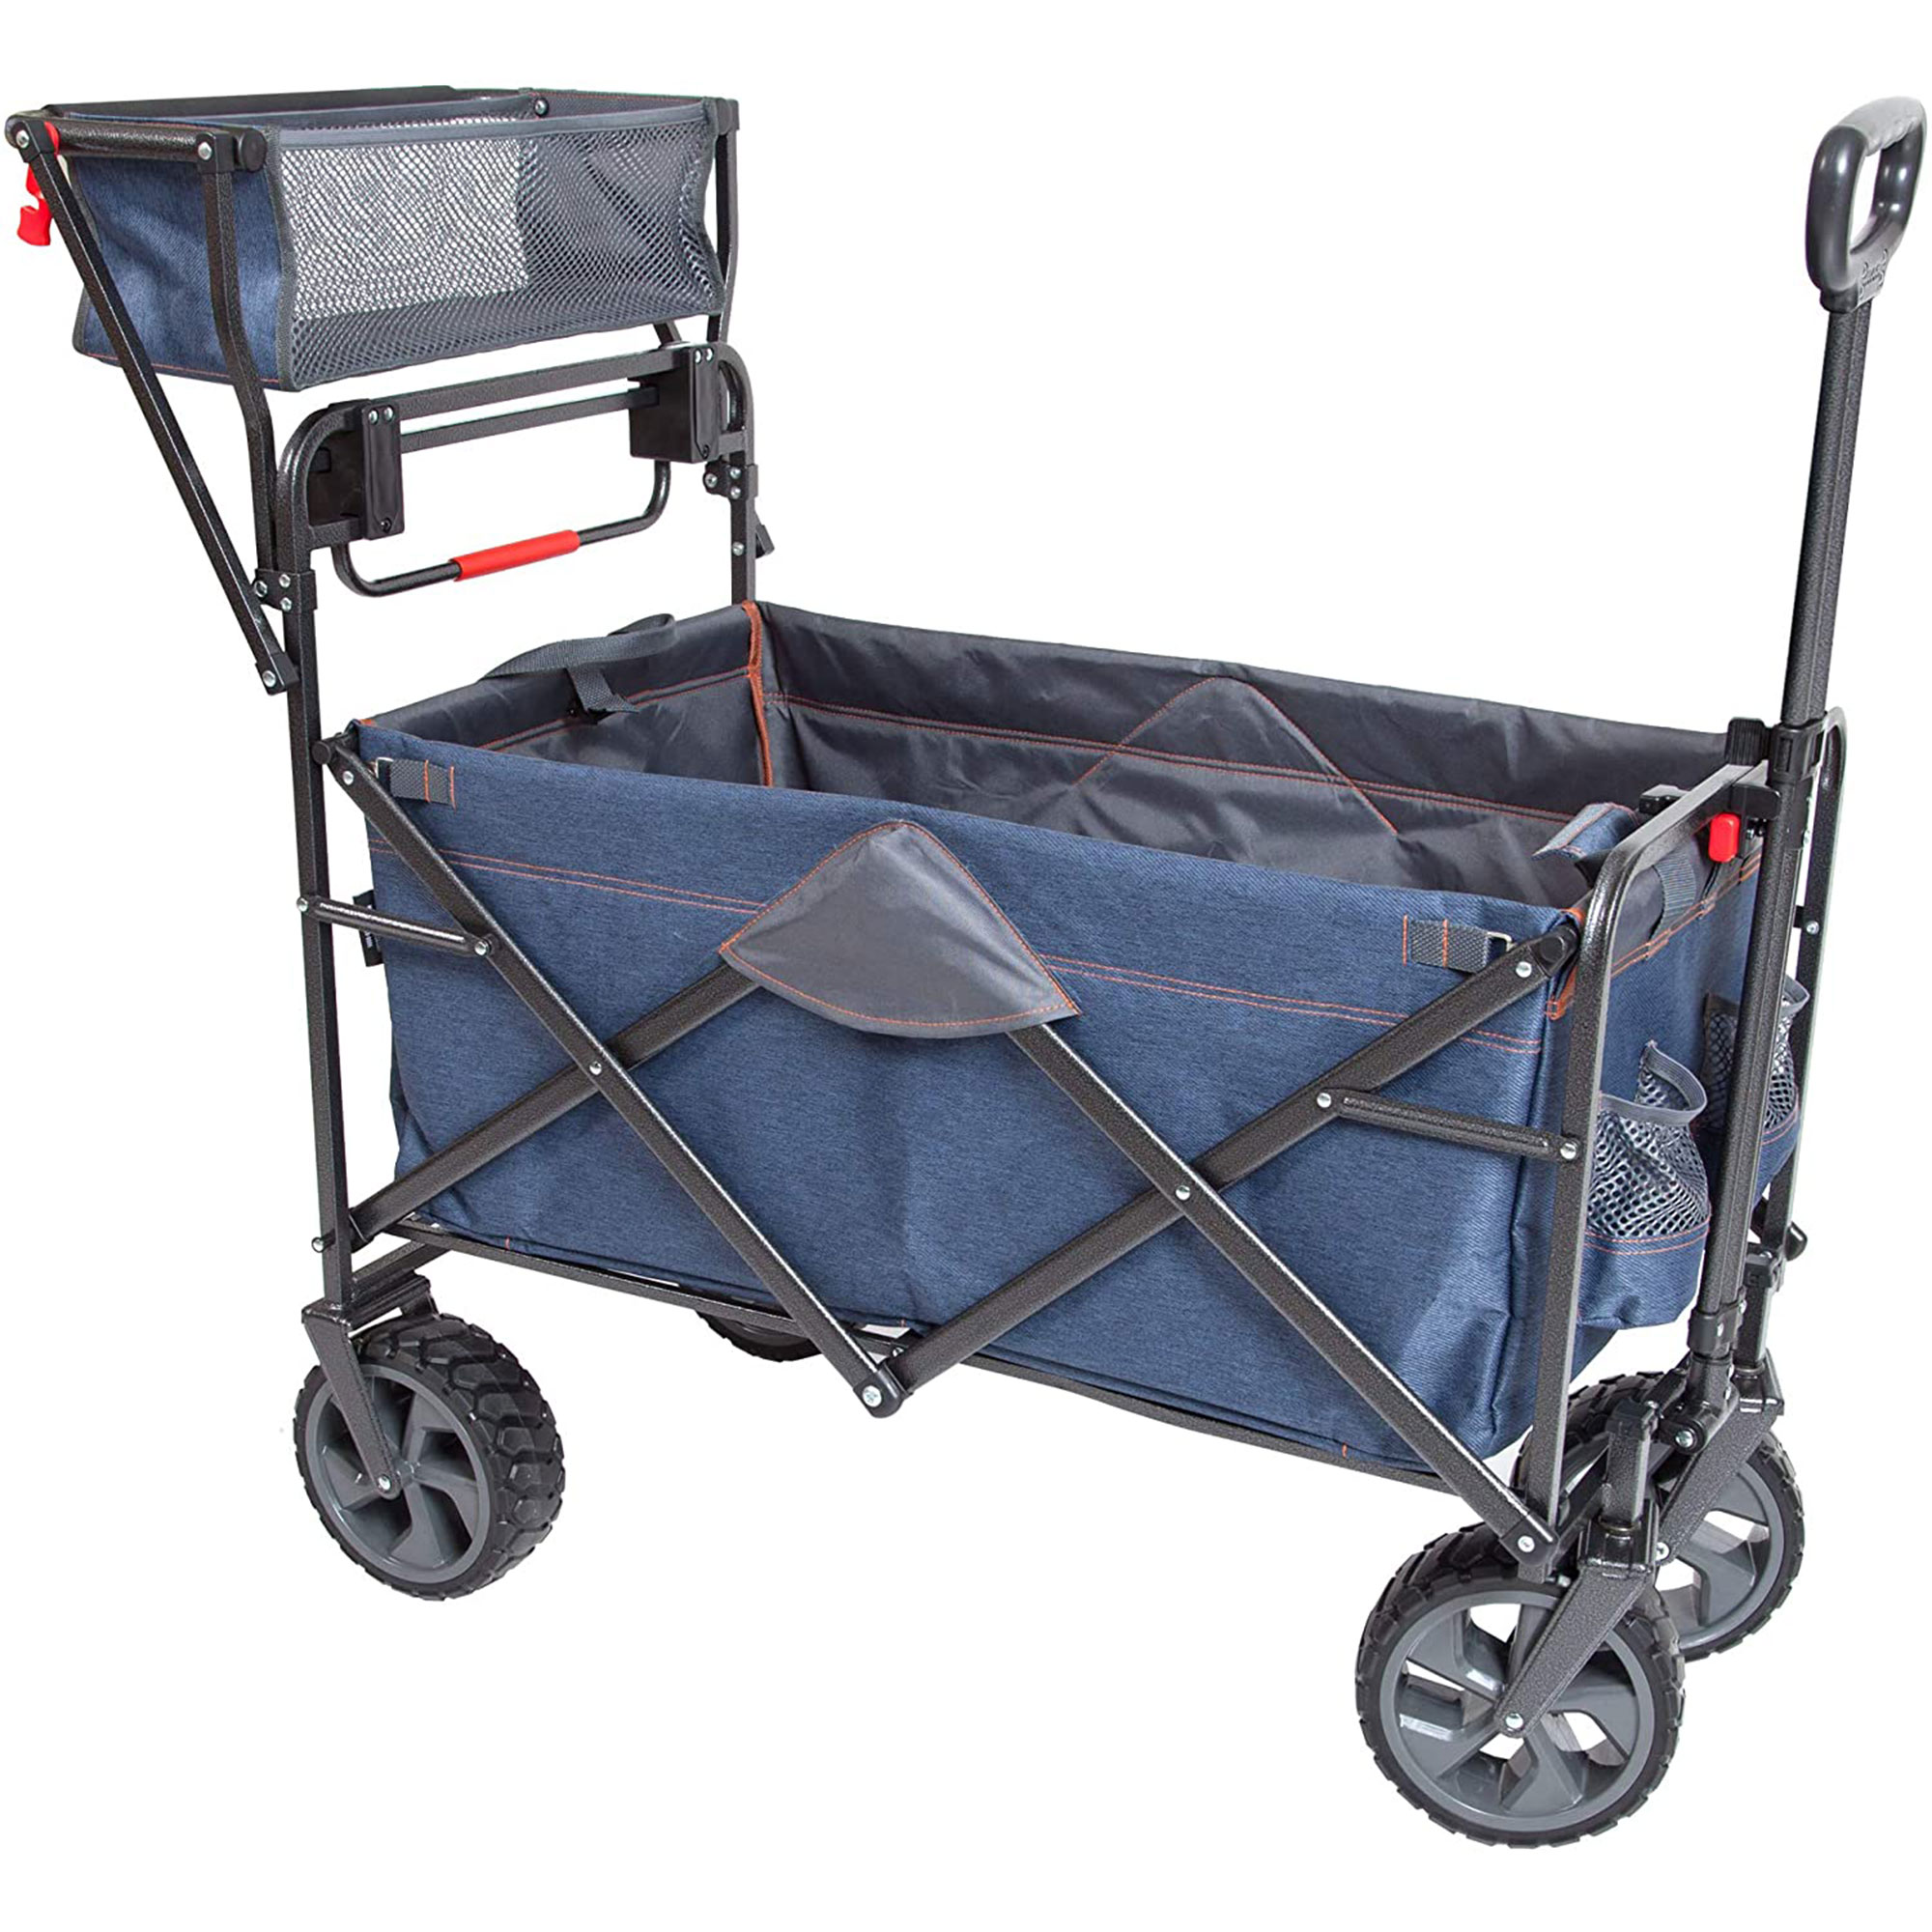 Mac Sports Collapsible Heavy Duty Push Pull Utility Cart Wagon, Blue - image 3 of 9